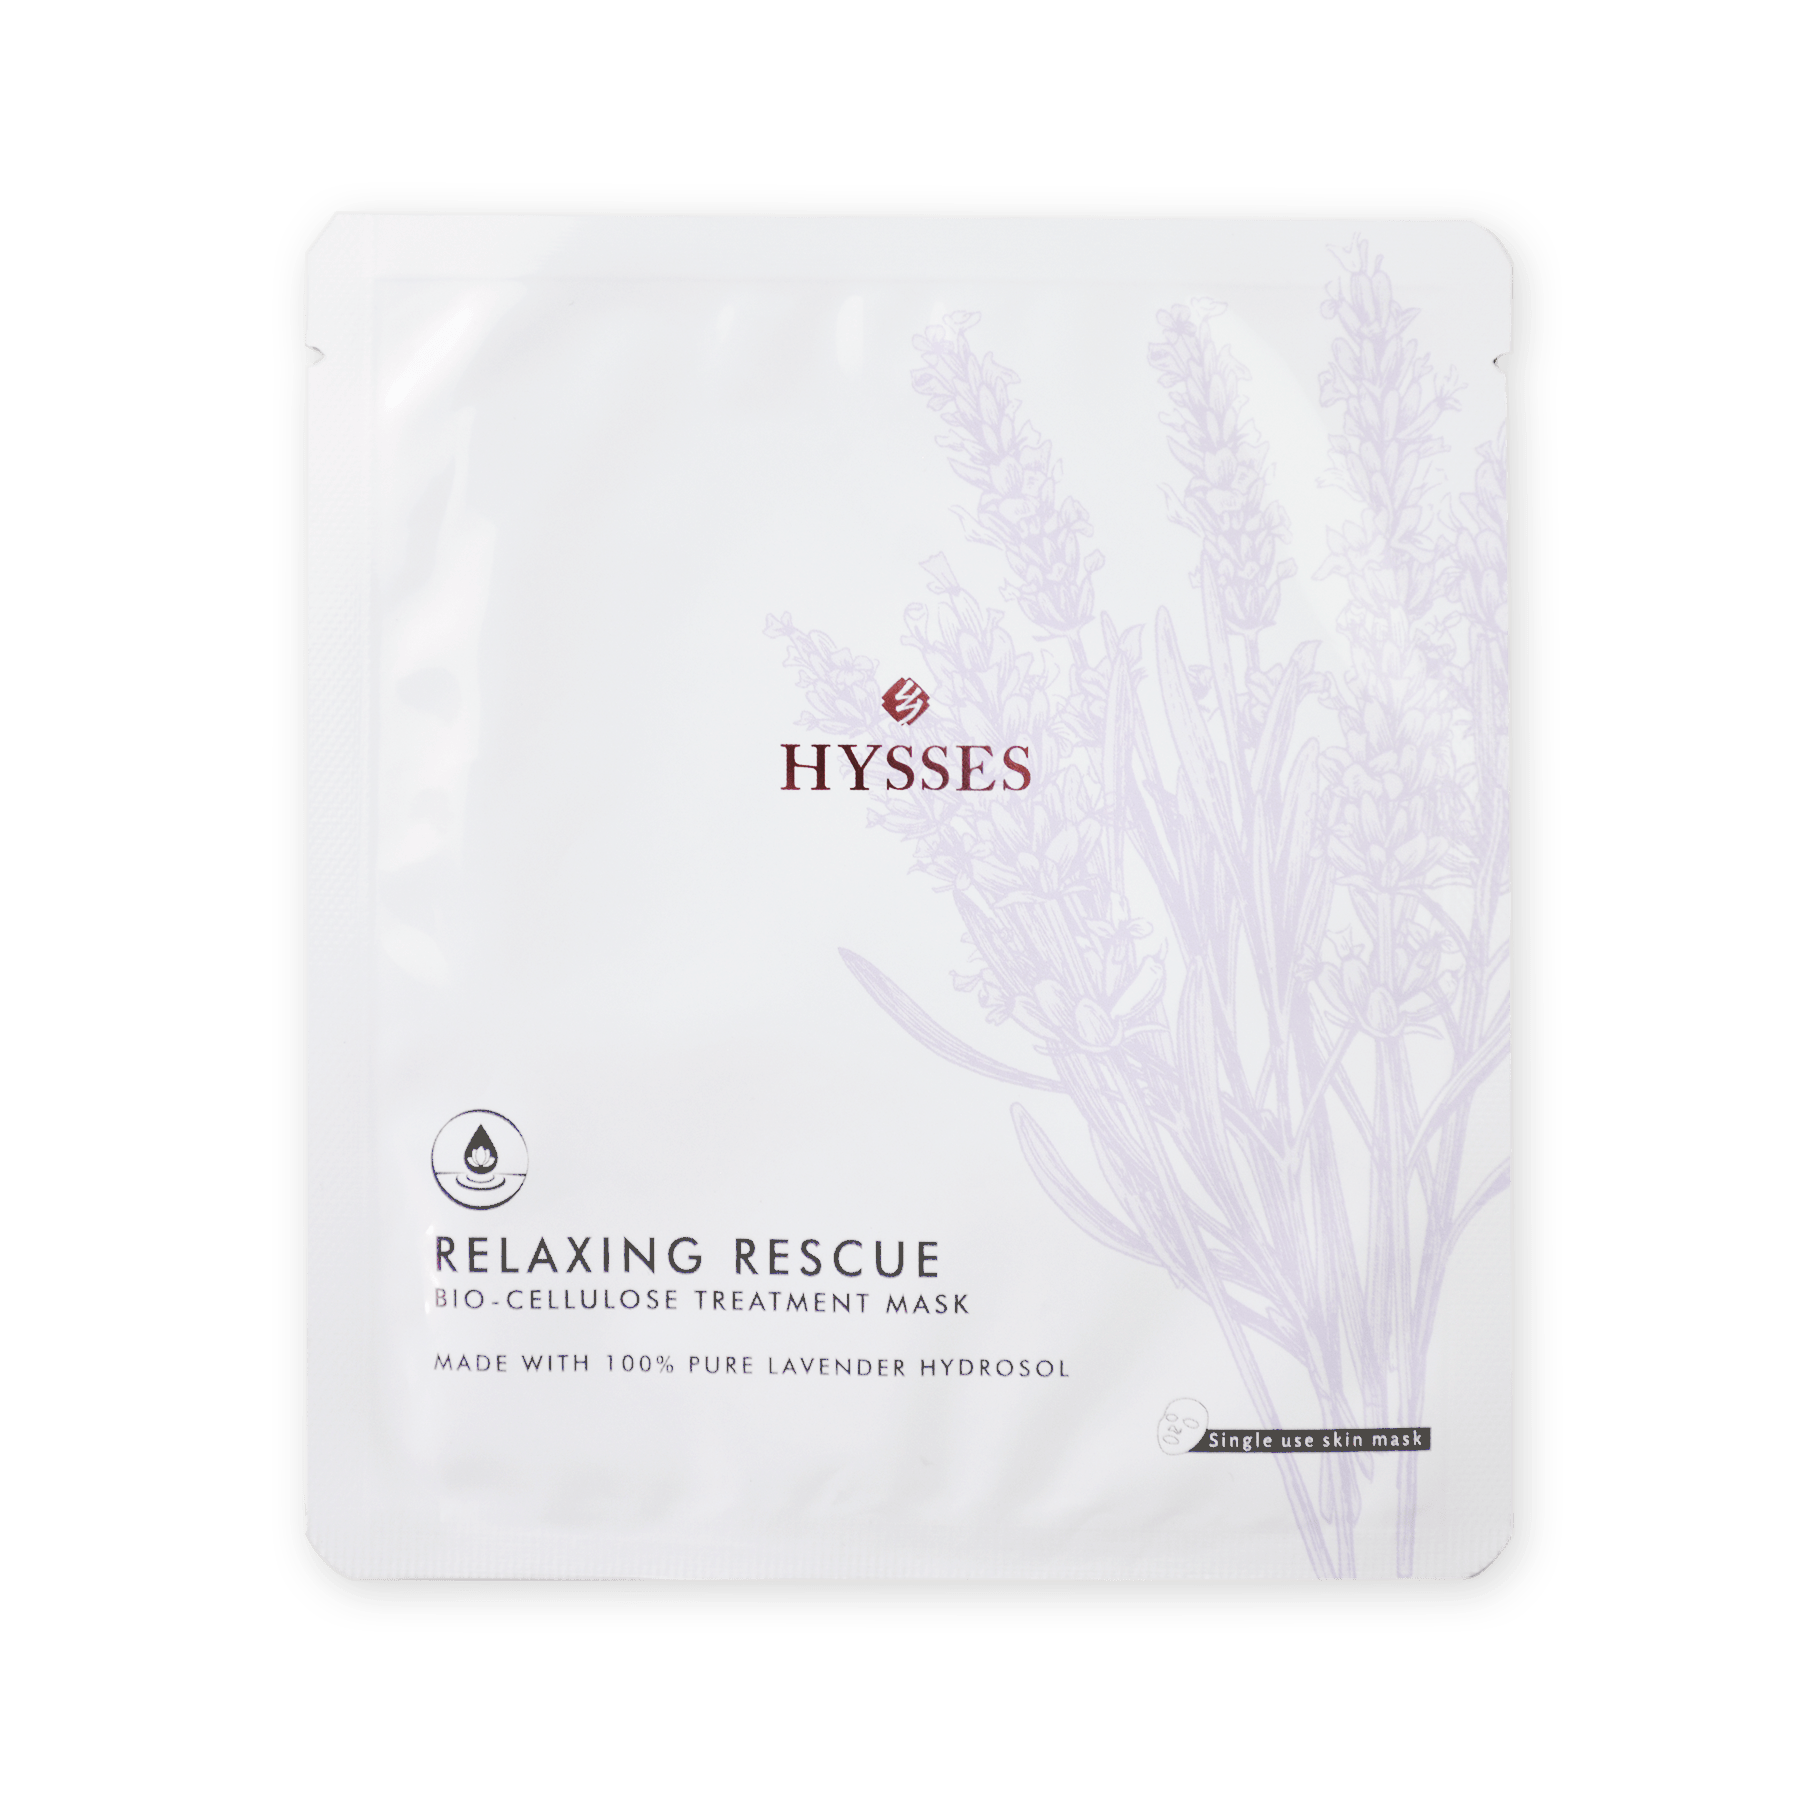 Hysses Face Care Bio Cellulose Mask Relaxing Lavender